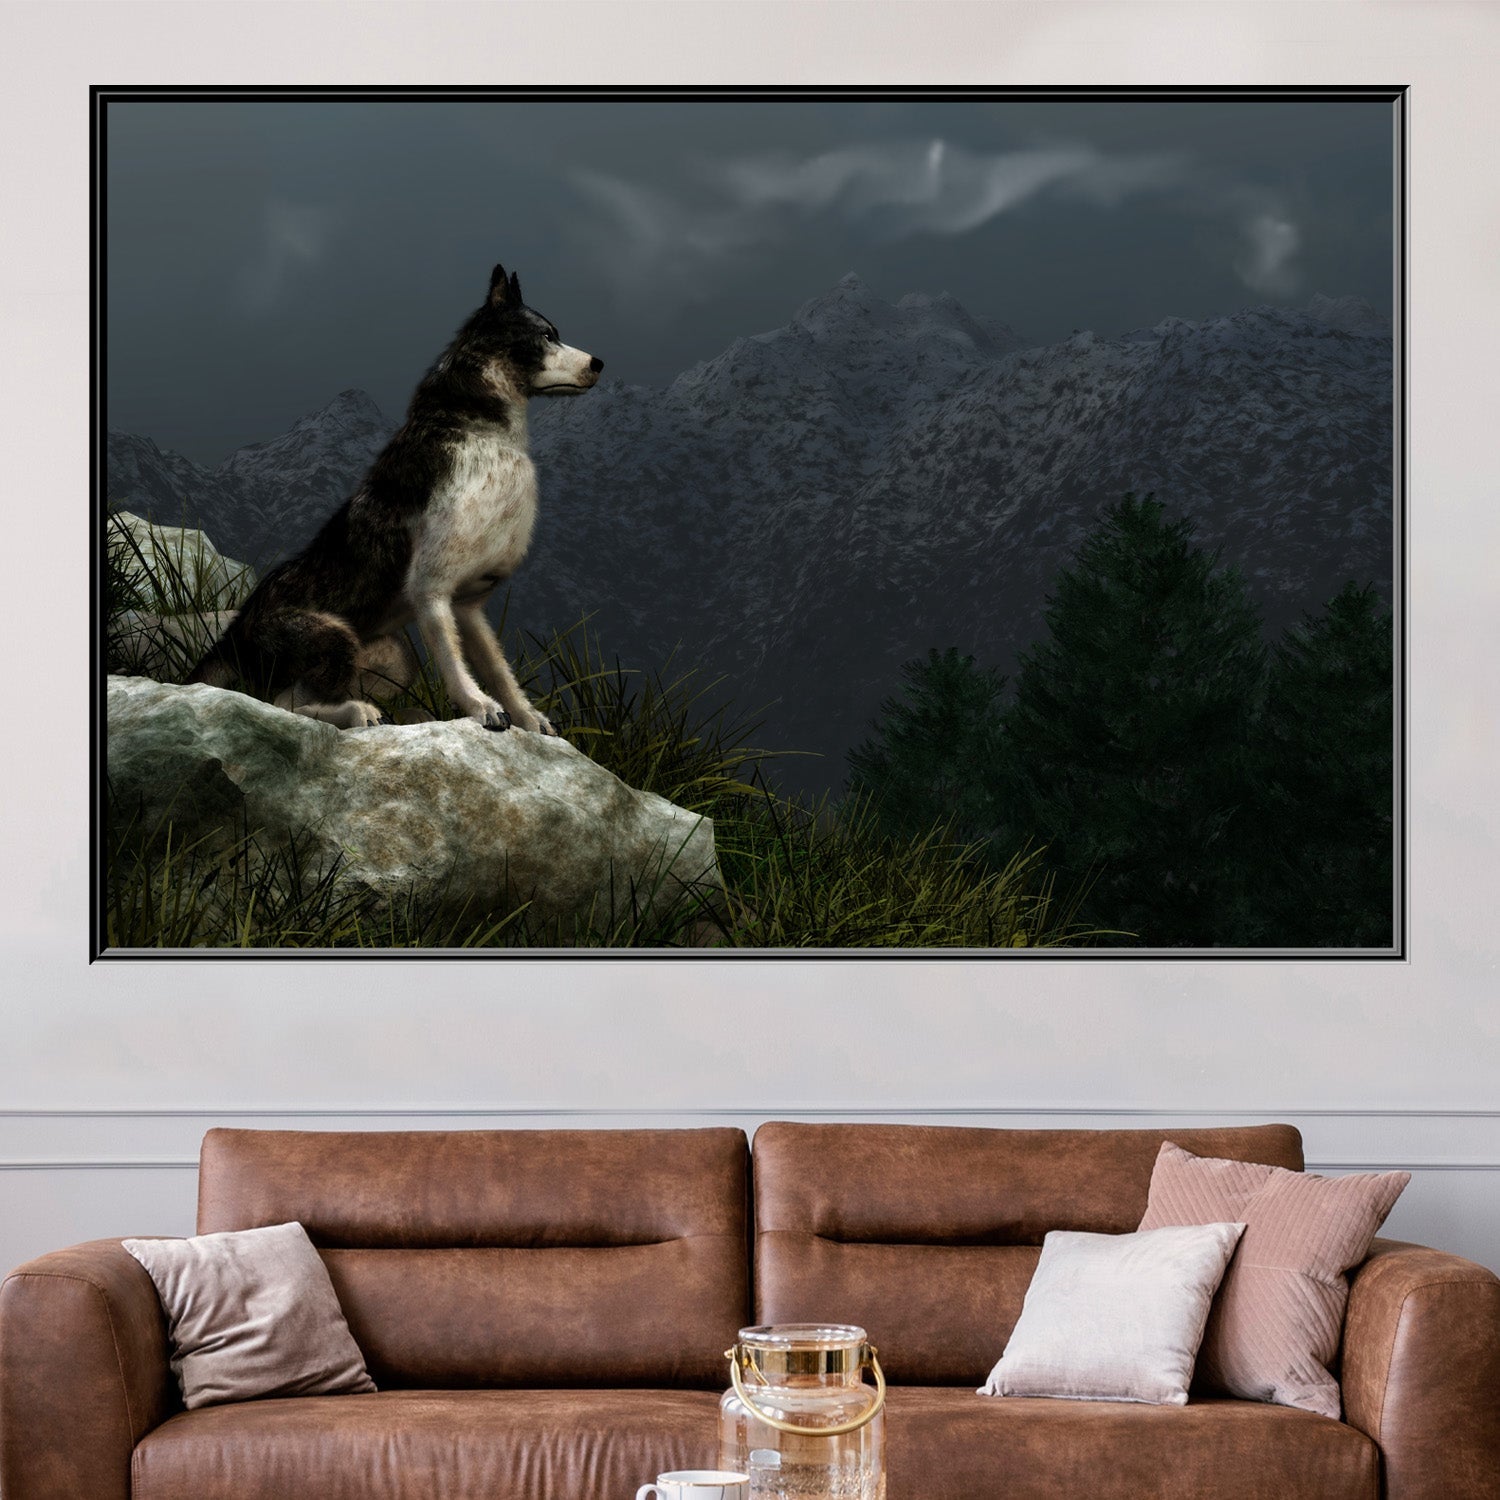 https://cdn.shopify.com/s/files/1/0387/9986/8044/products/SolitaryWolfCanvasArtprintStretched-4.jpg